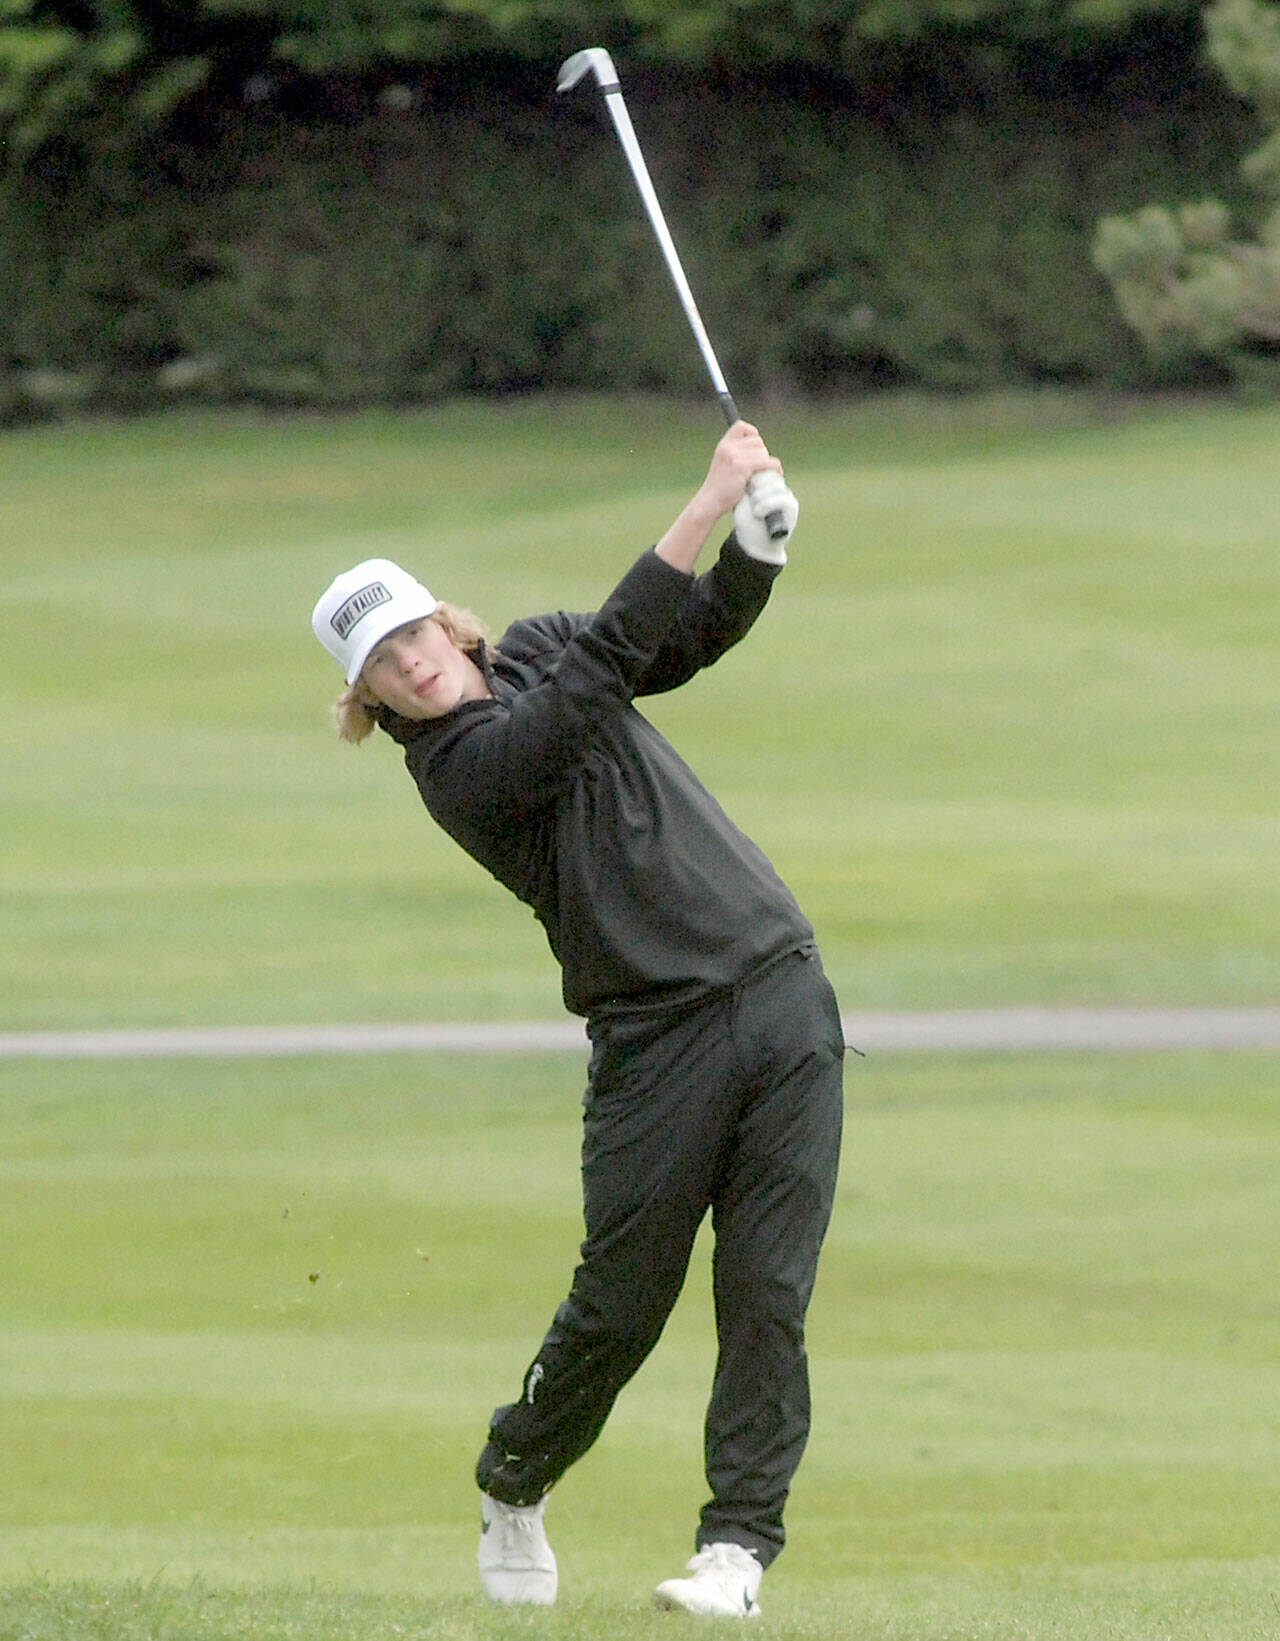 Sequim’s Ben Sweet hits from the fairway on the first hole against Port Angeles on April 15 at Peninsula Golf Club. Sweet shot a 4-over-par 40, one shot back of medalist teammate Dominick Riccobene. Photo by Keith Thorpe/Olympic Peninsula News Group